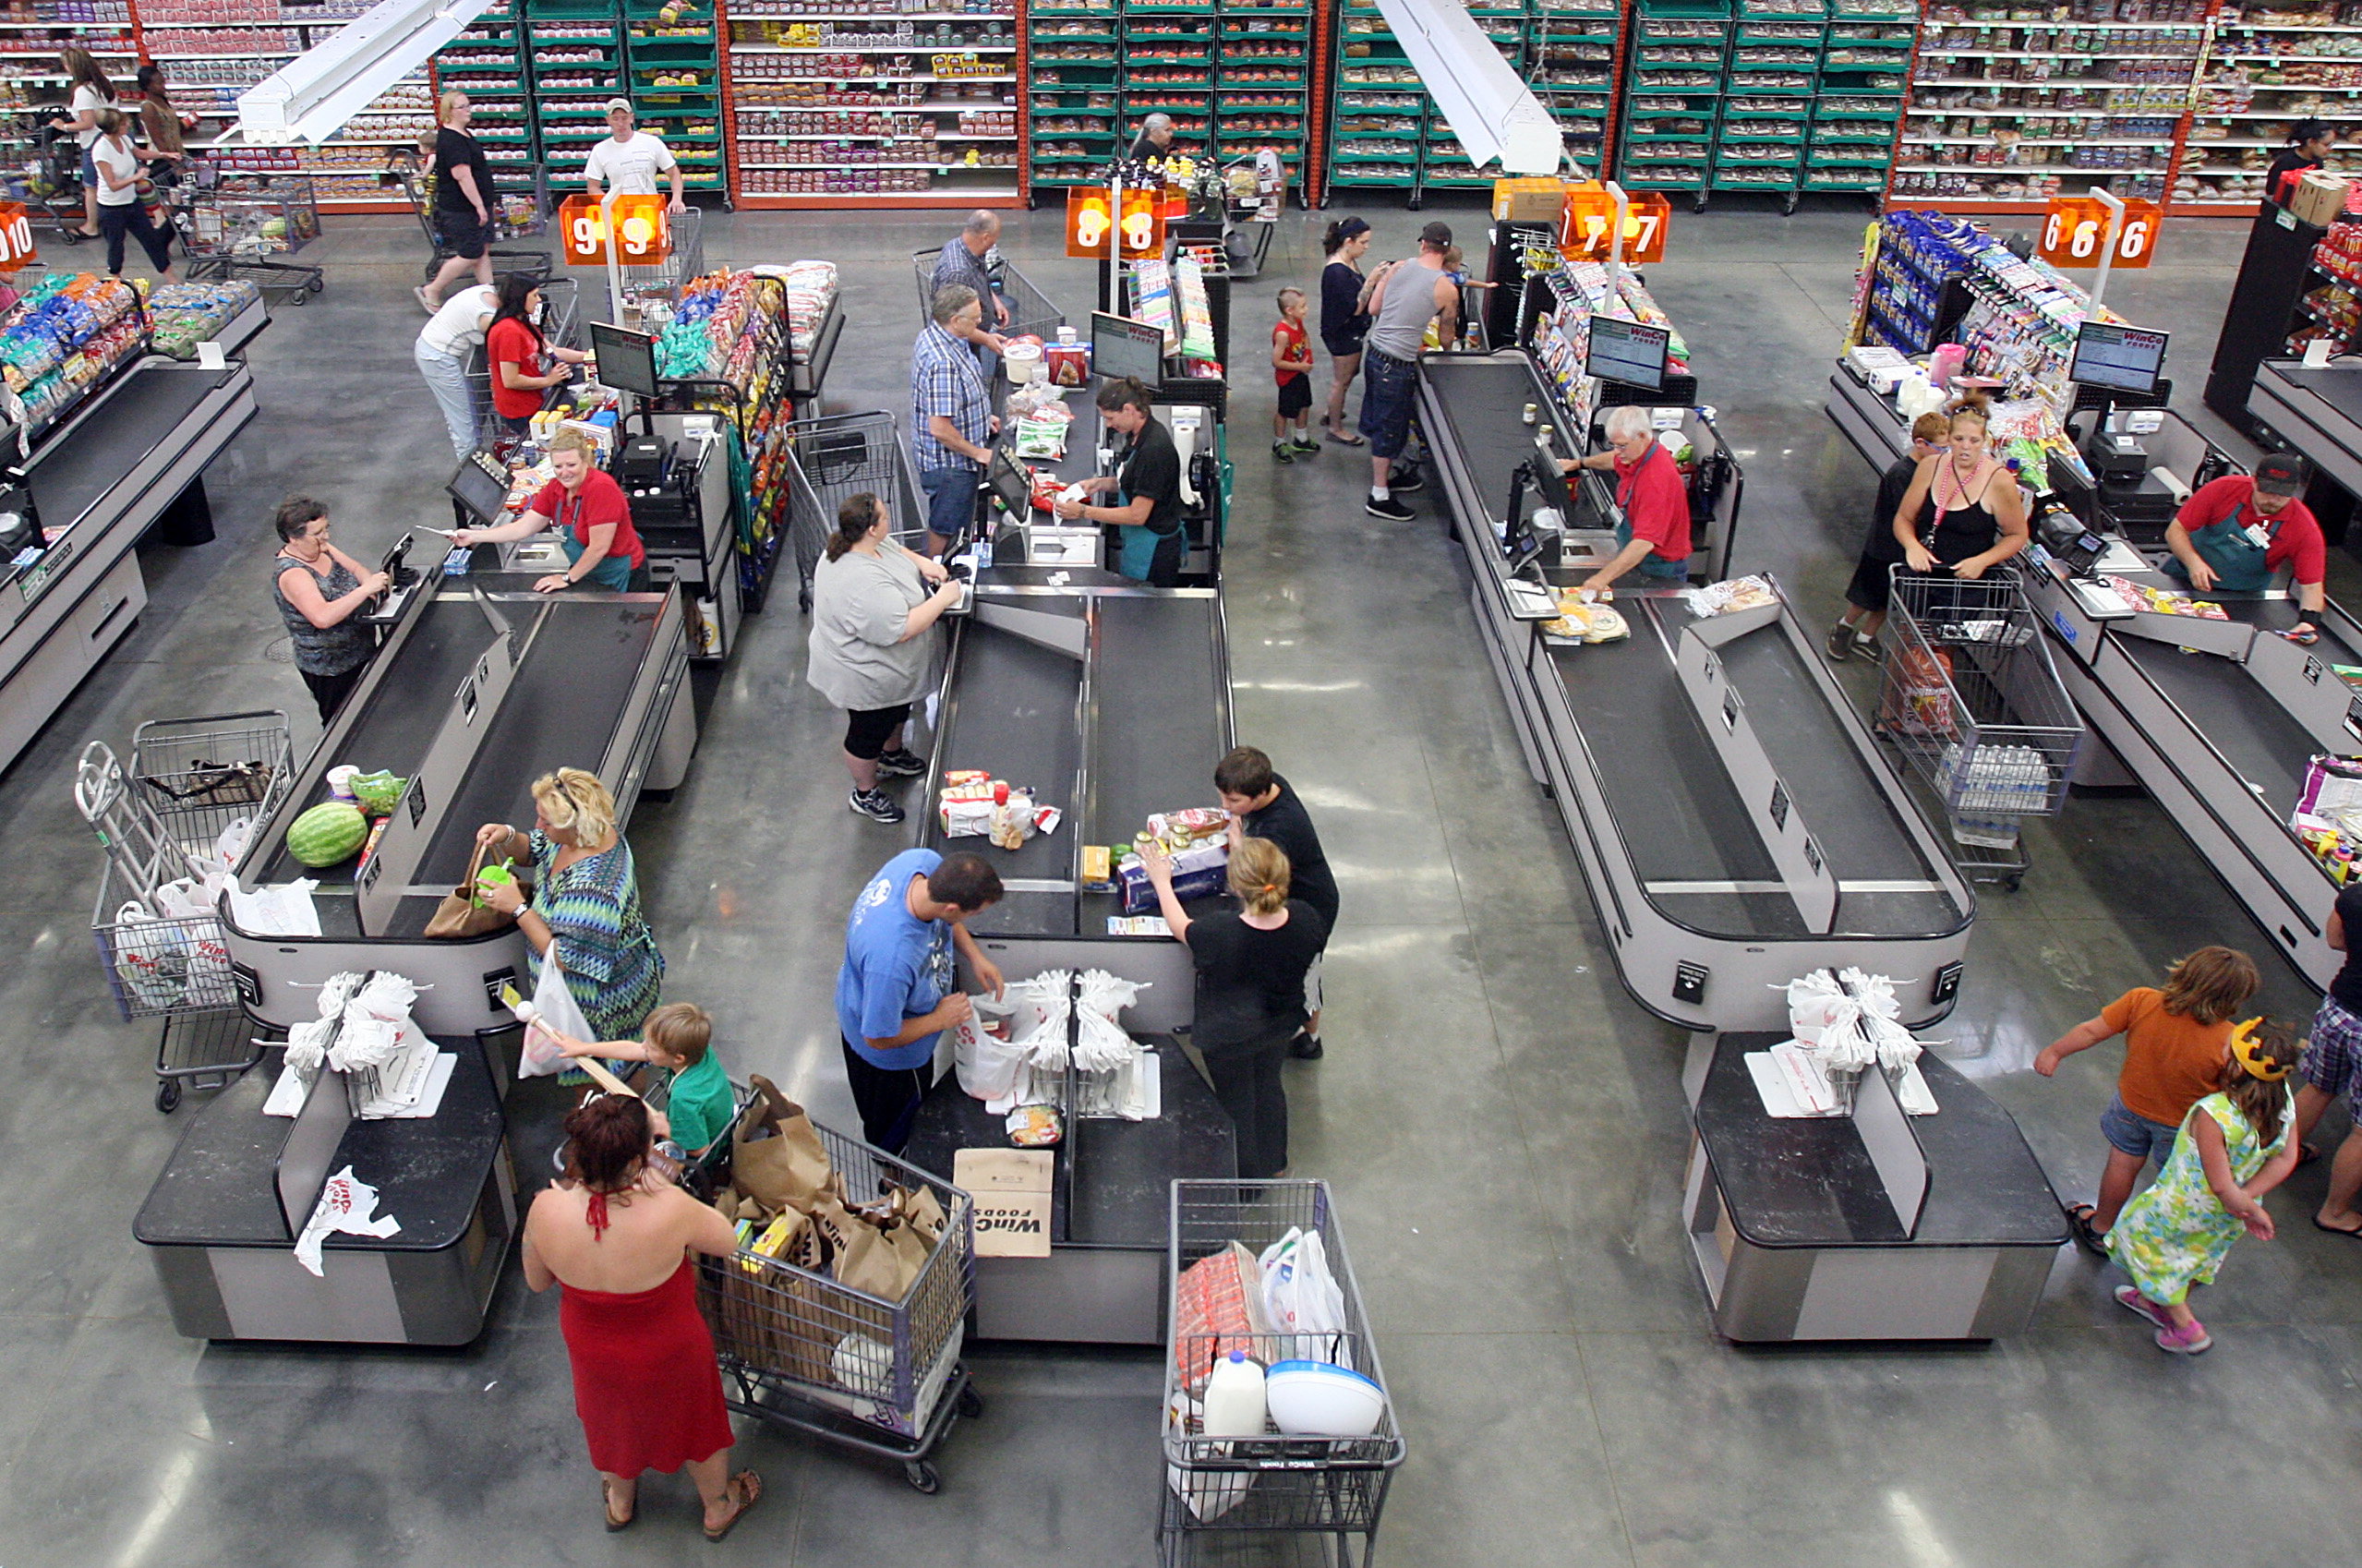 Customers bag their own groceries at checkout counters at WinCo Foods on Fairview Avenue in Boise, Idaho, on July 1, 2013.